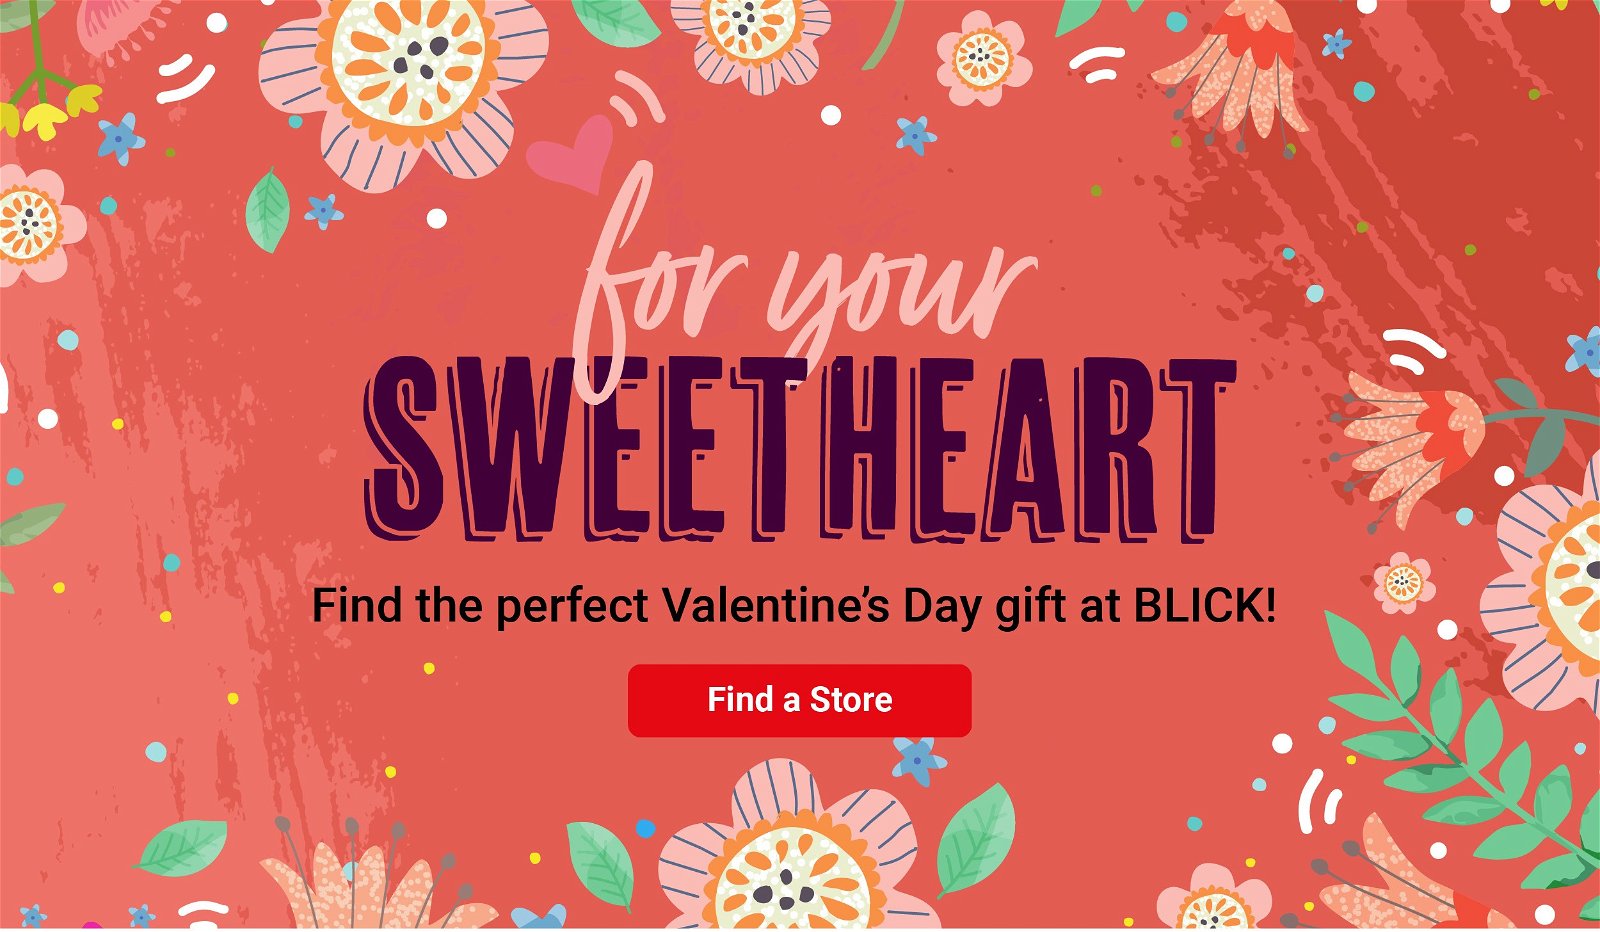 For Your Sweetheart: Find the perfect Valentine's Day gift at Blick!